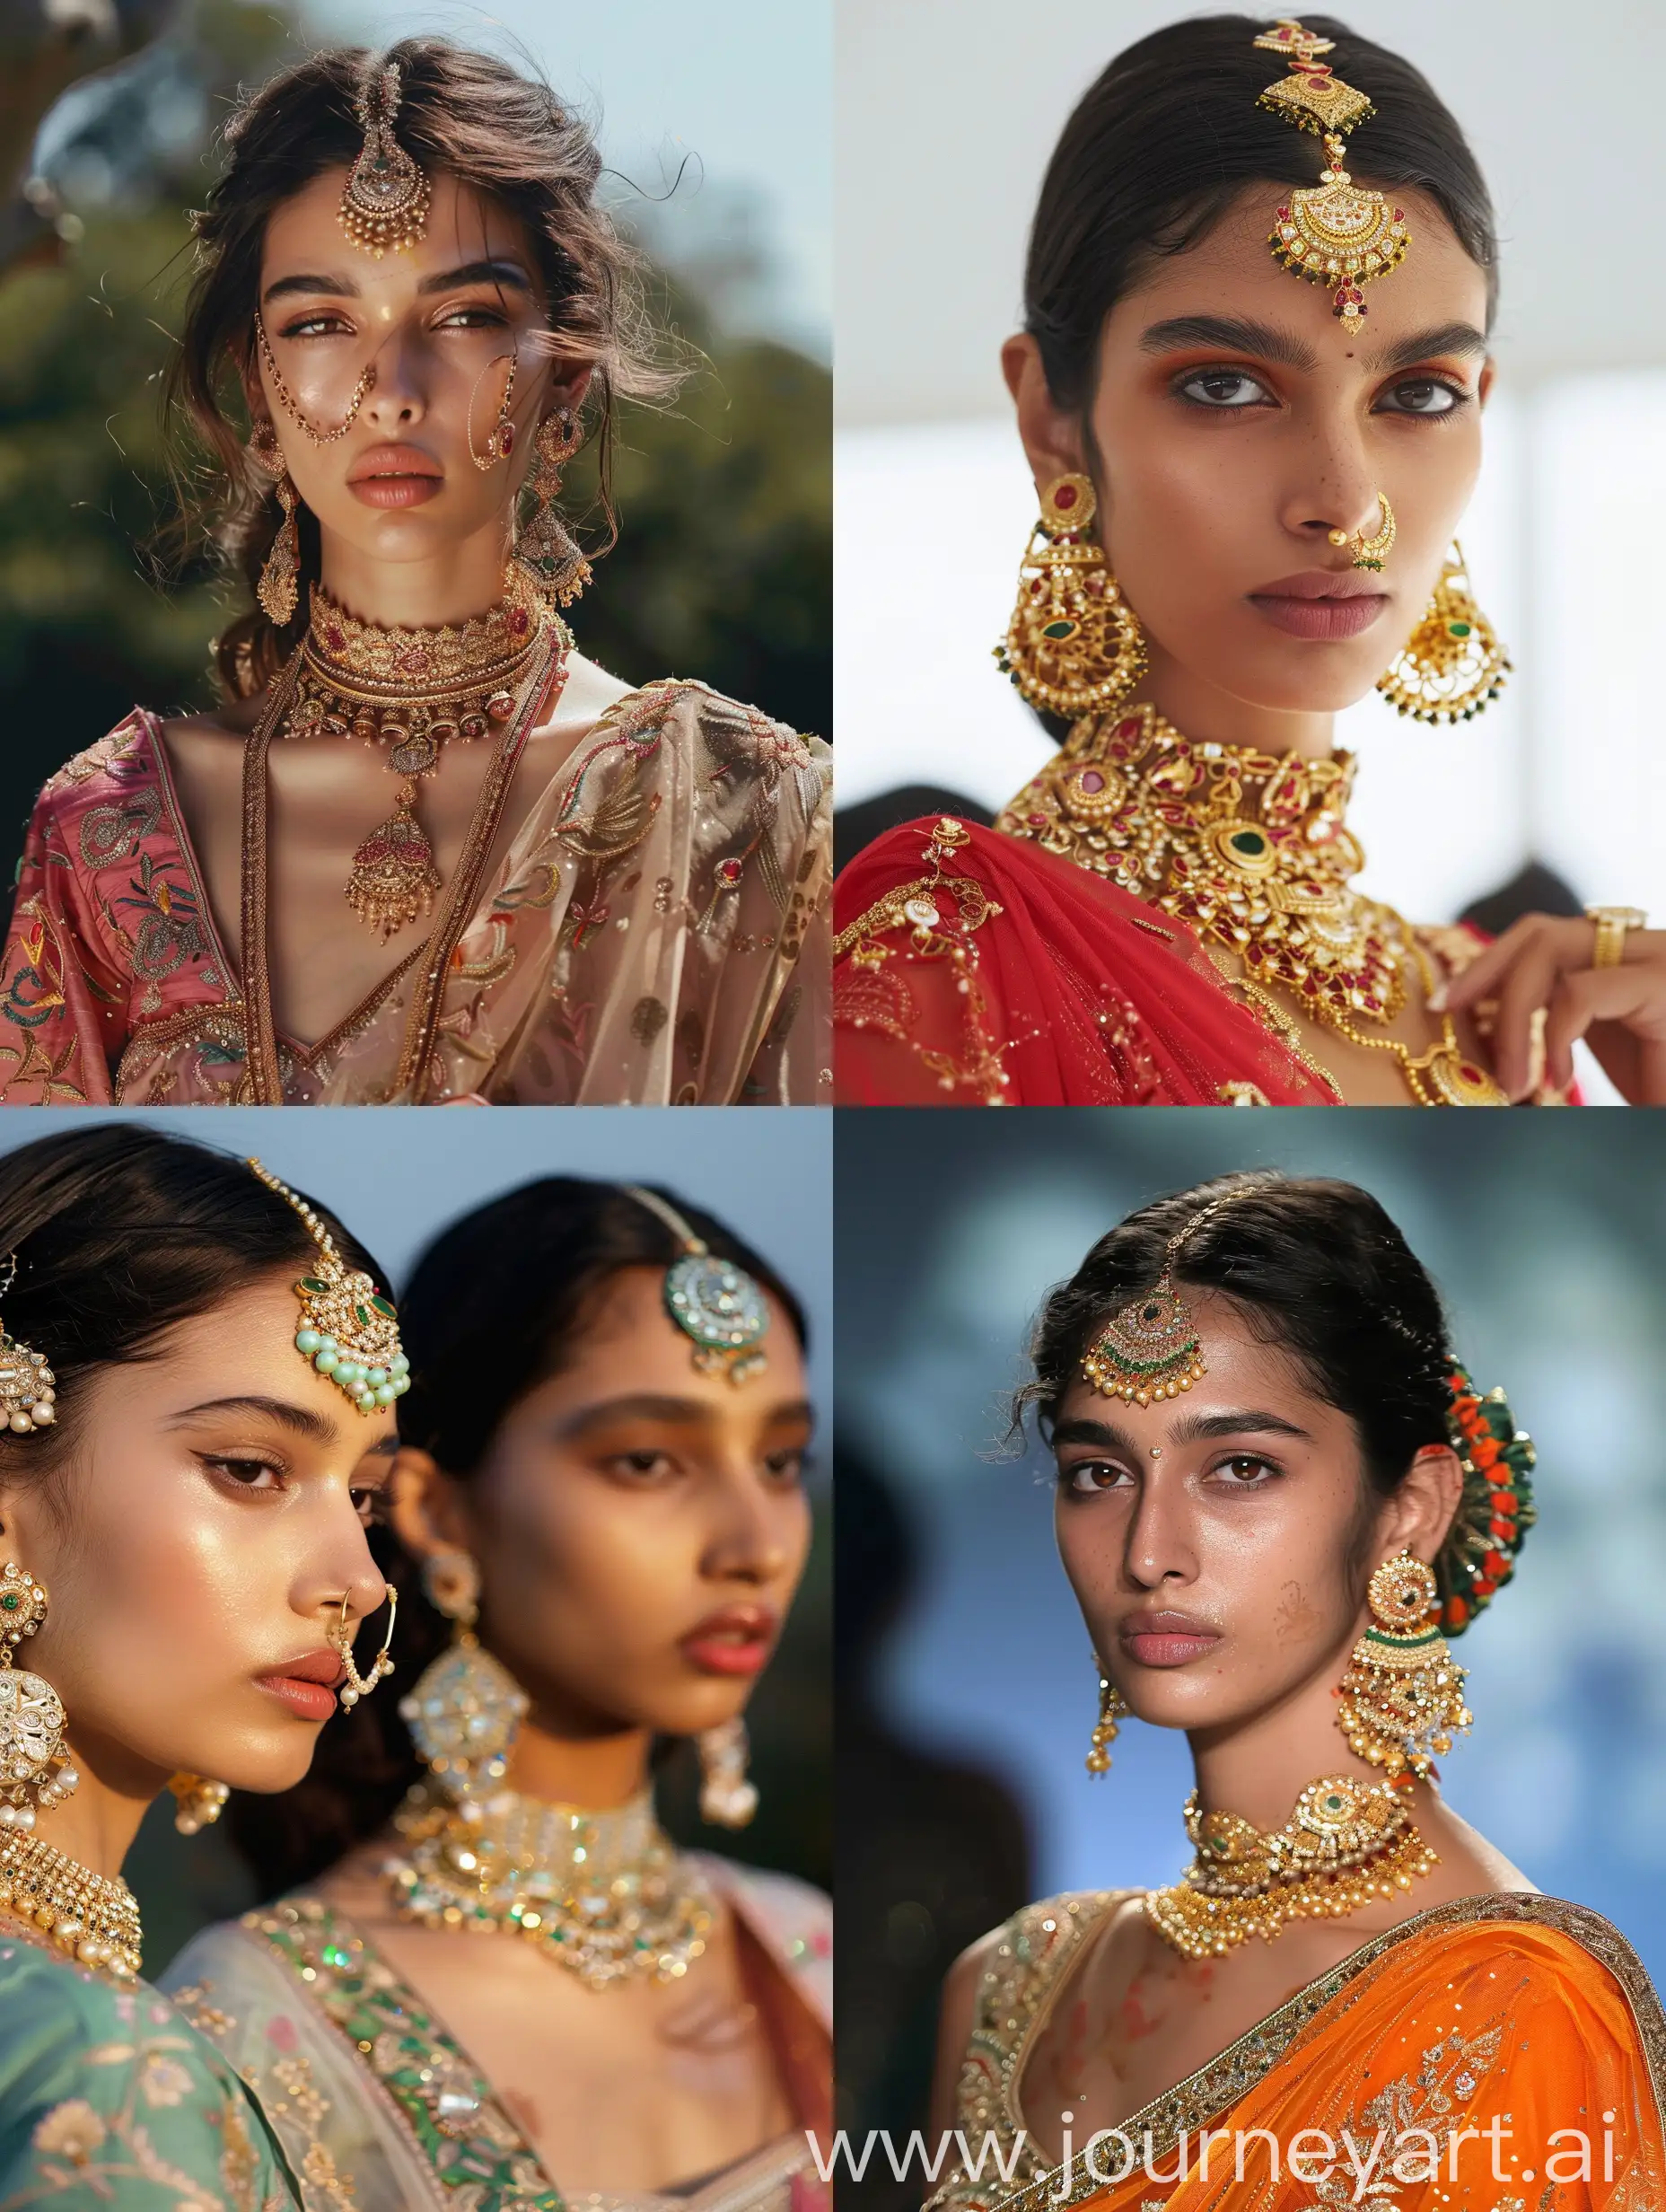 Exquisite-Indian-Models-Showcasing-Traditional-Jewelry